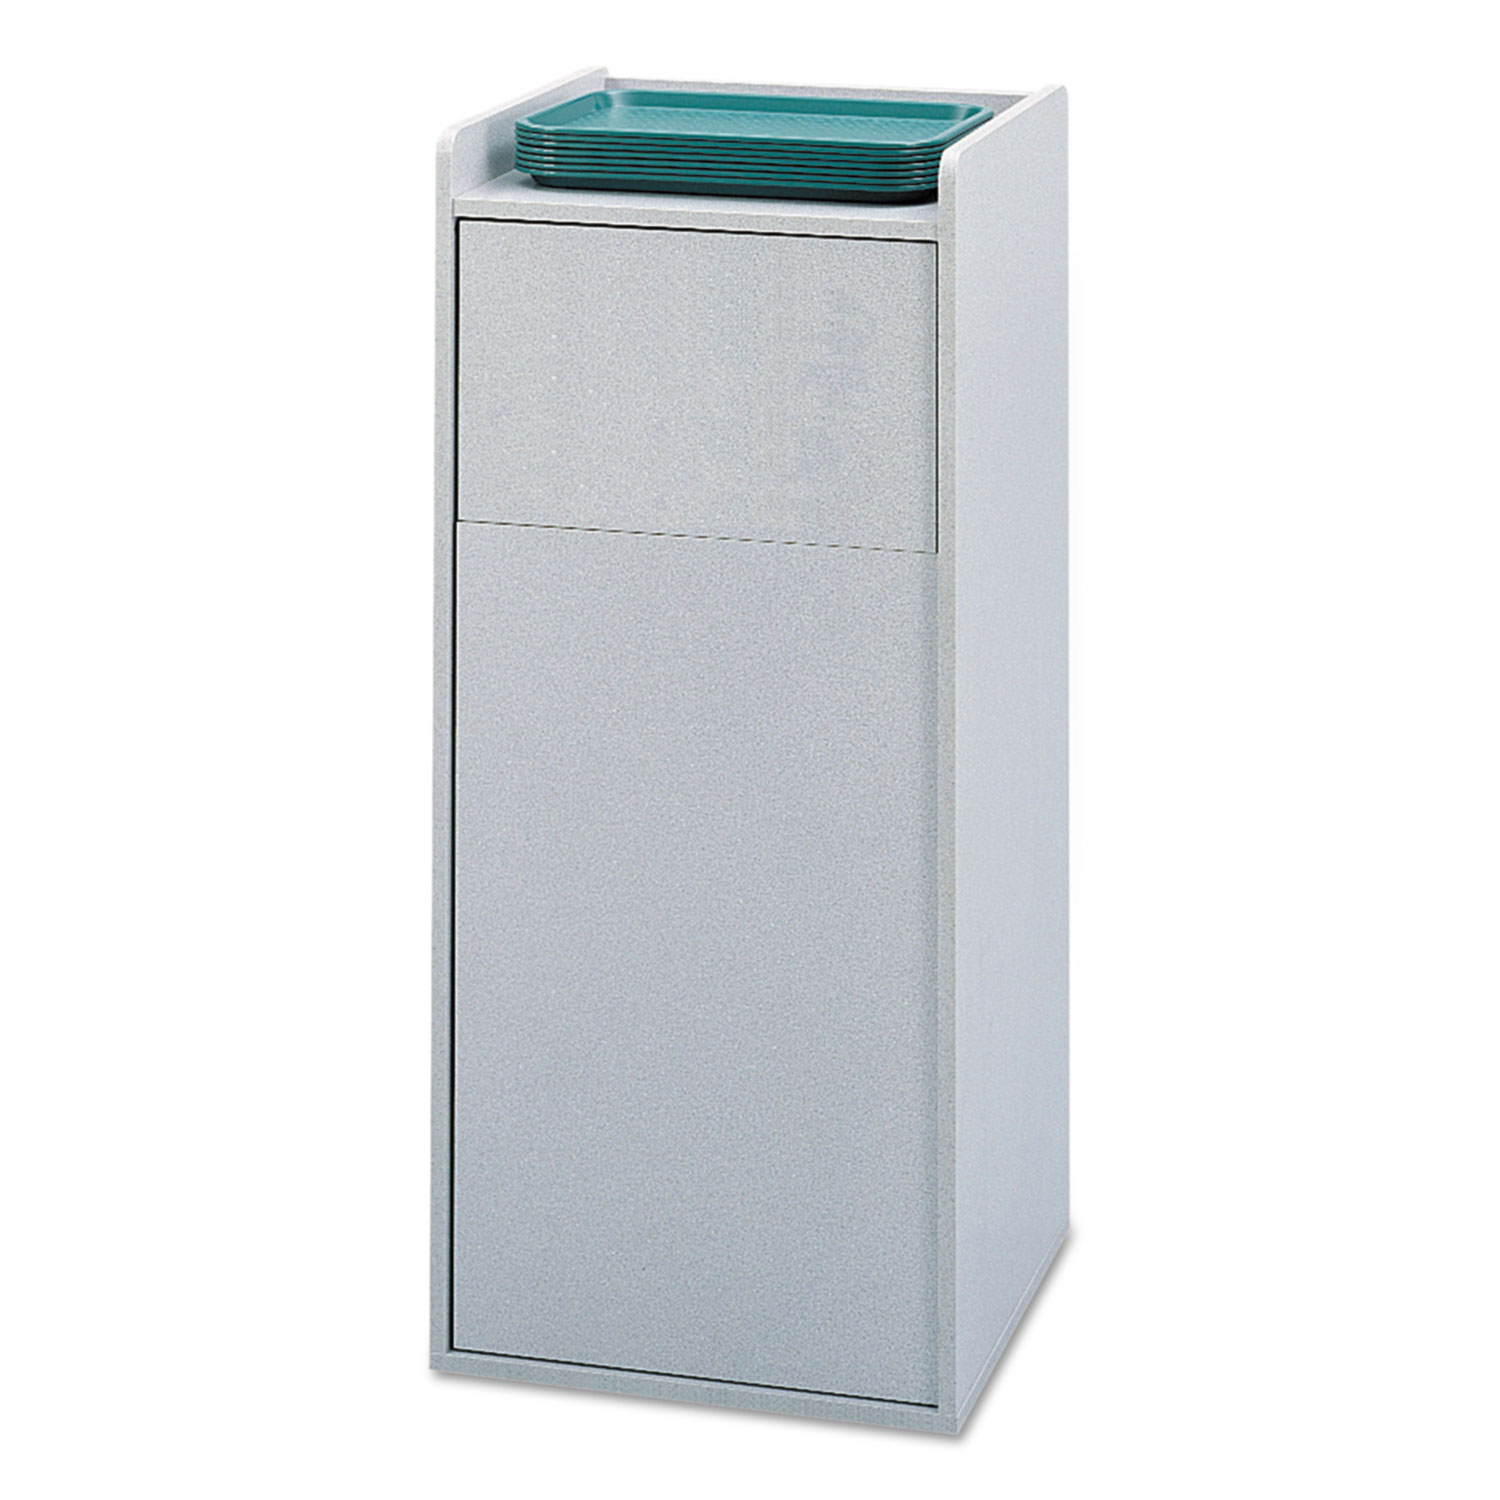 Push Door Waste Receptacle w/Tray Holder, Square, Wood, 36gal, Gray